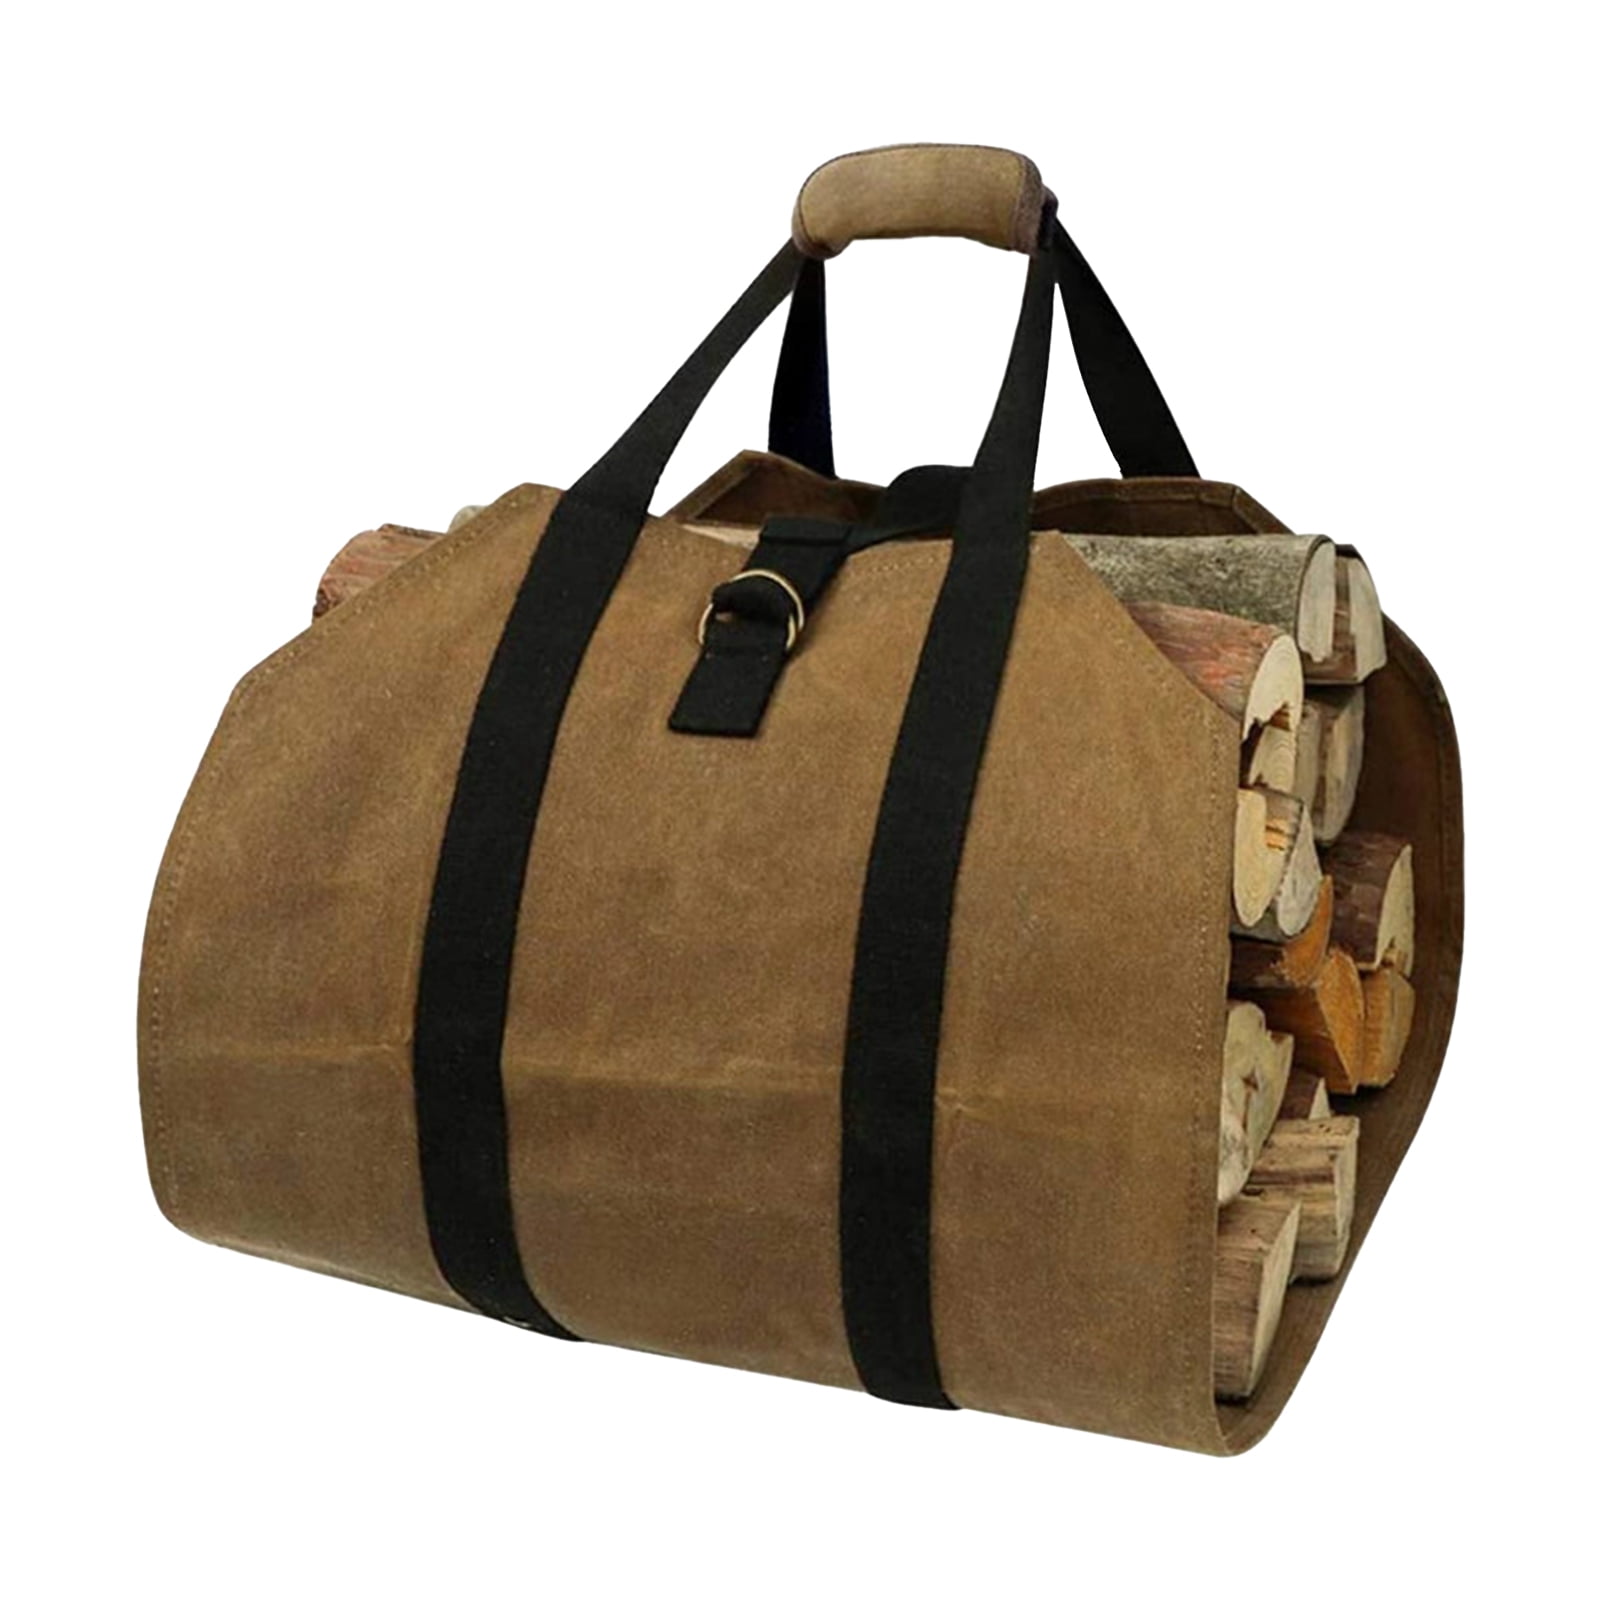 LARGE 40" x 19" Log Carrier Waxed Canvas Wrap Holder Wood Carrier Tote Bag 